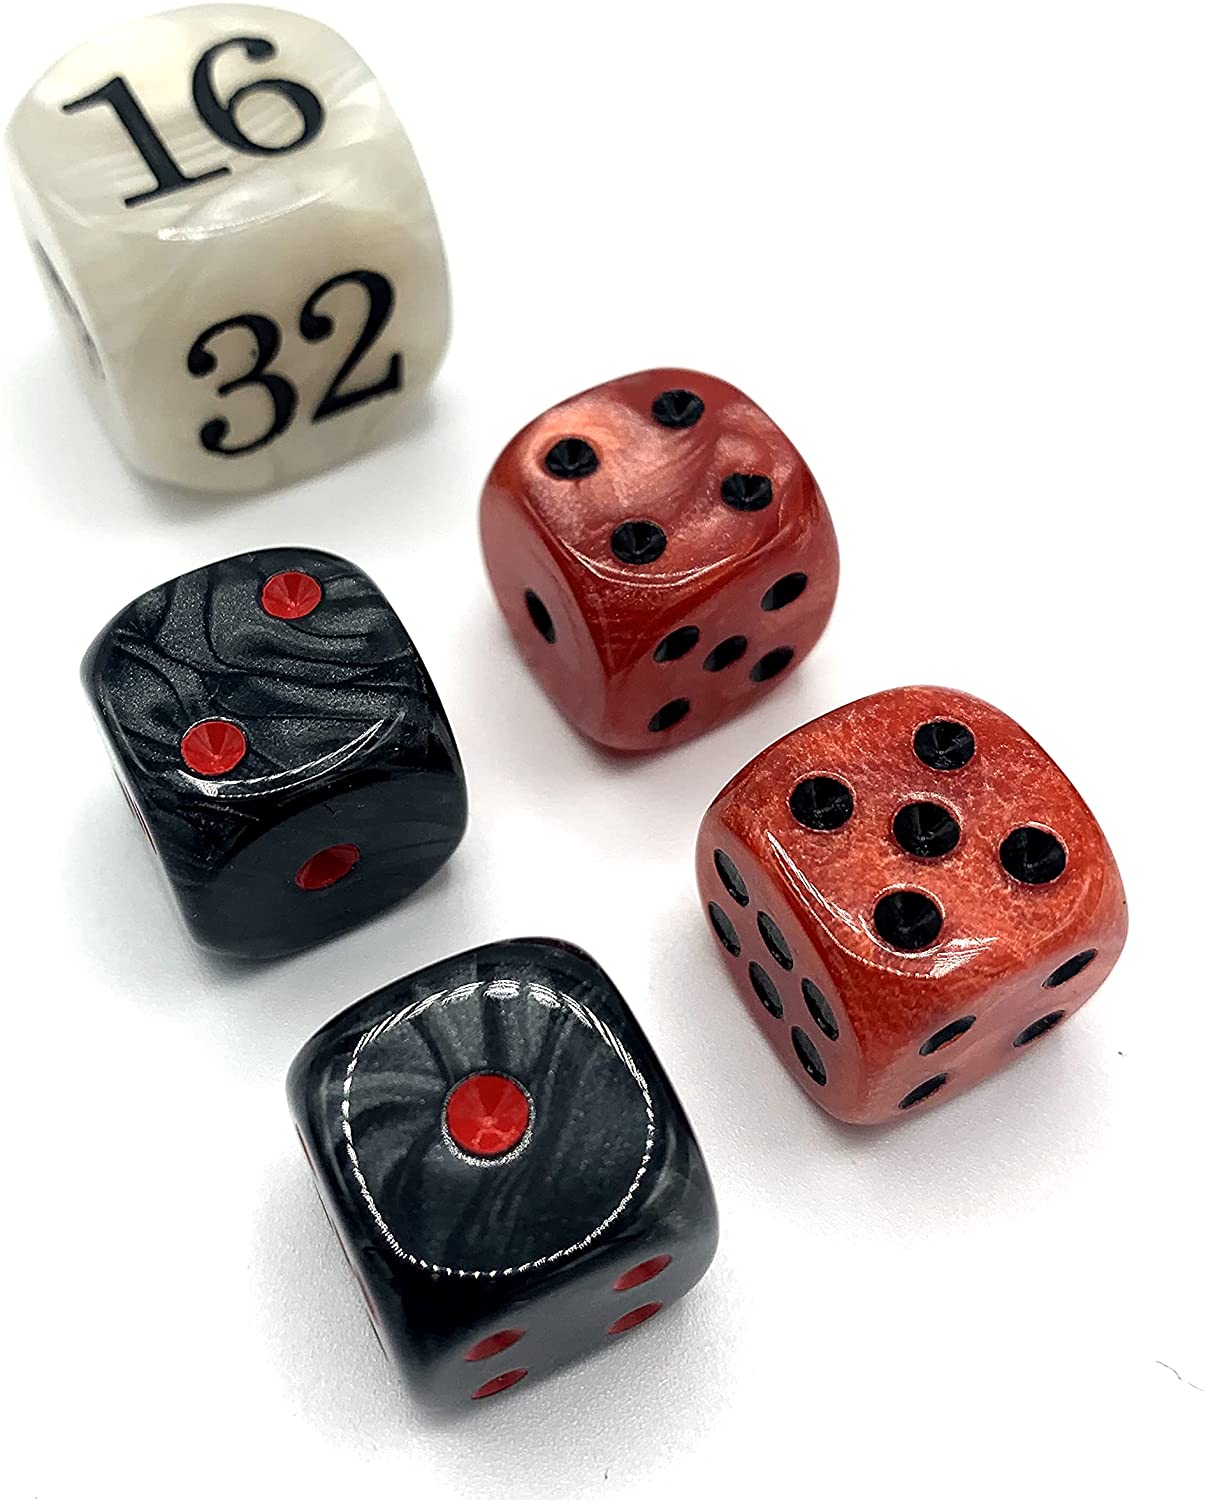 BACKGAMMON DICES SET DICE DOUBLING DICE,GAMES DICES,DOUBLING CUBES 22mm 